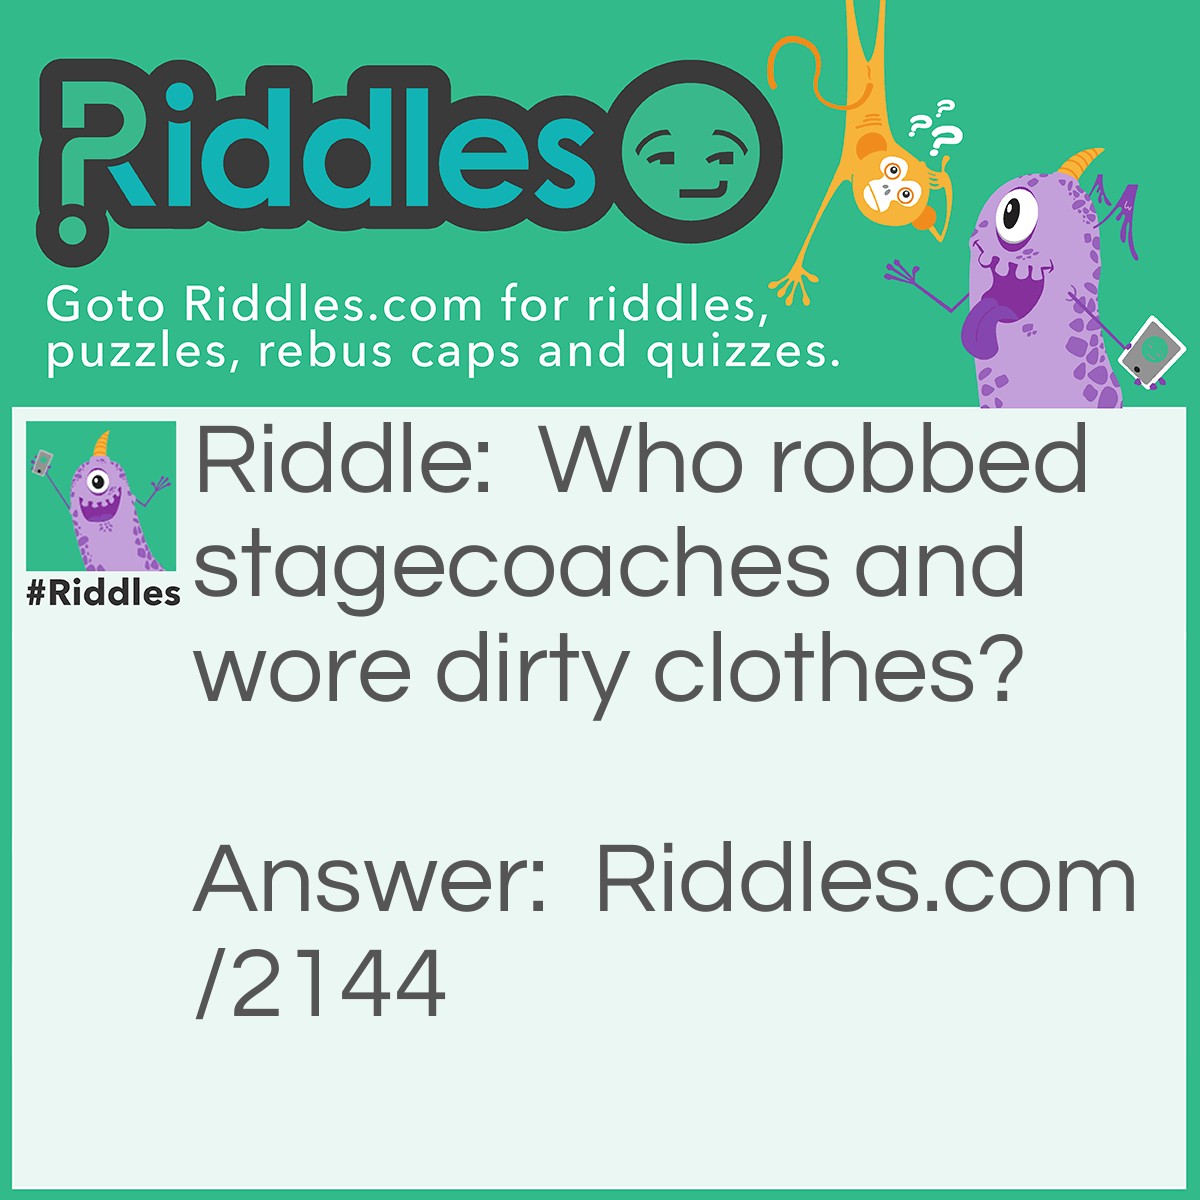 Riddle: Who robbed stagecoaches and wore dirty clothes? Answer: Messy James.